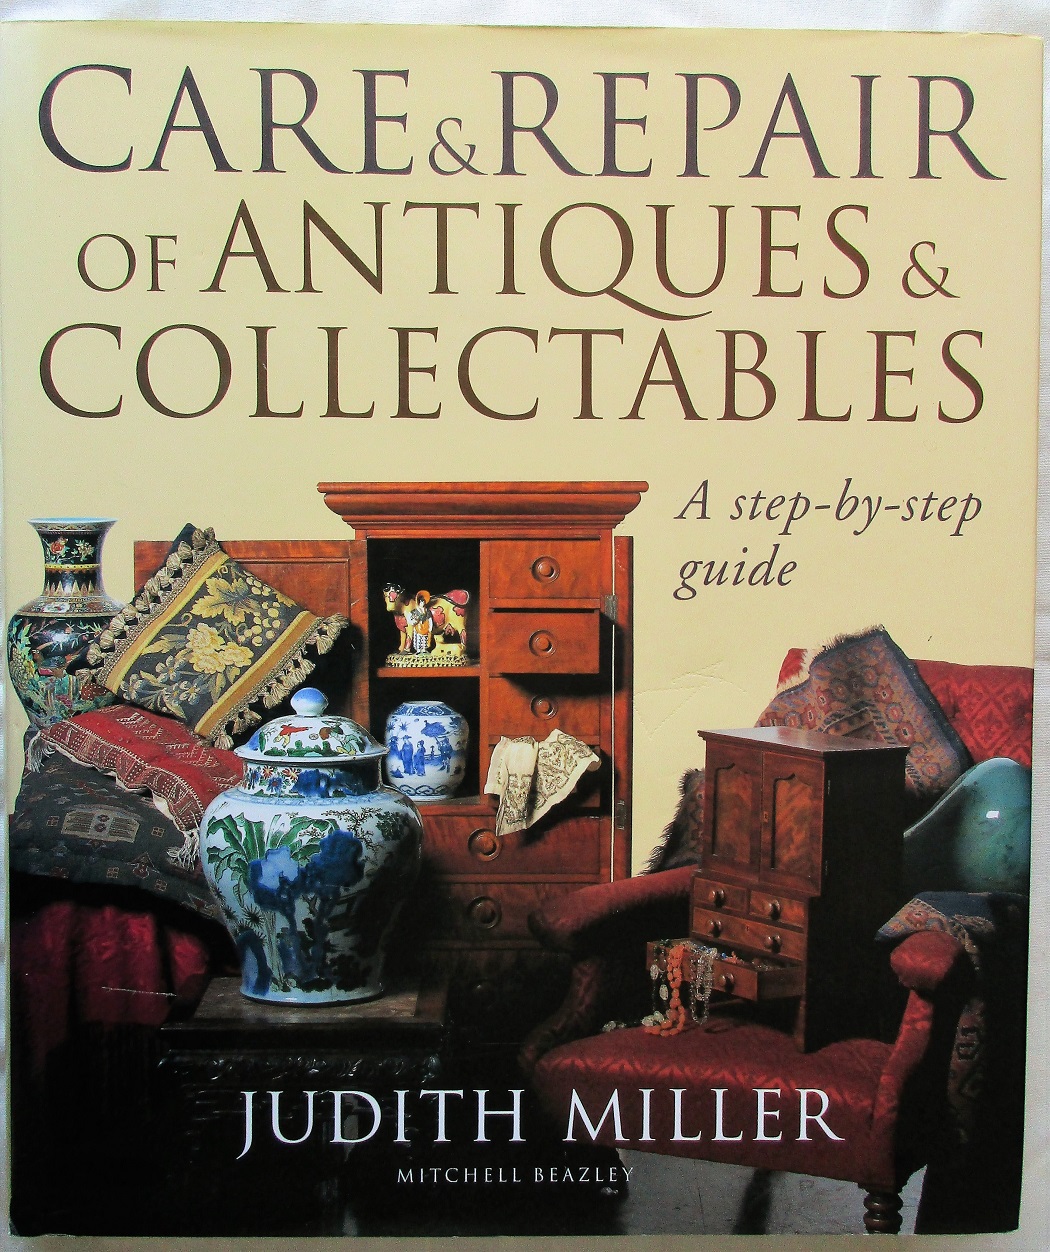 Care & repair of antiques & collectables